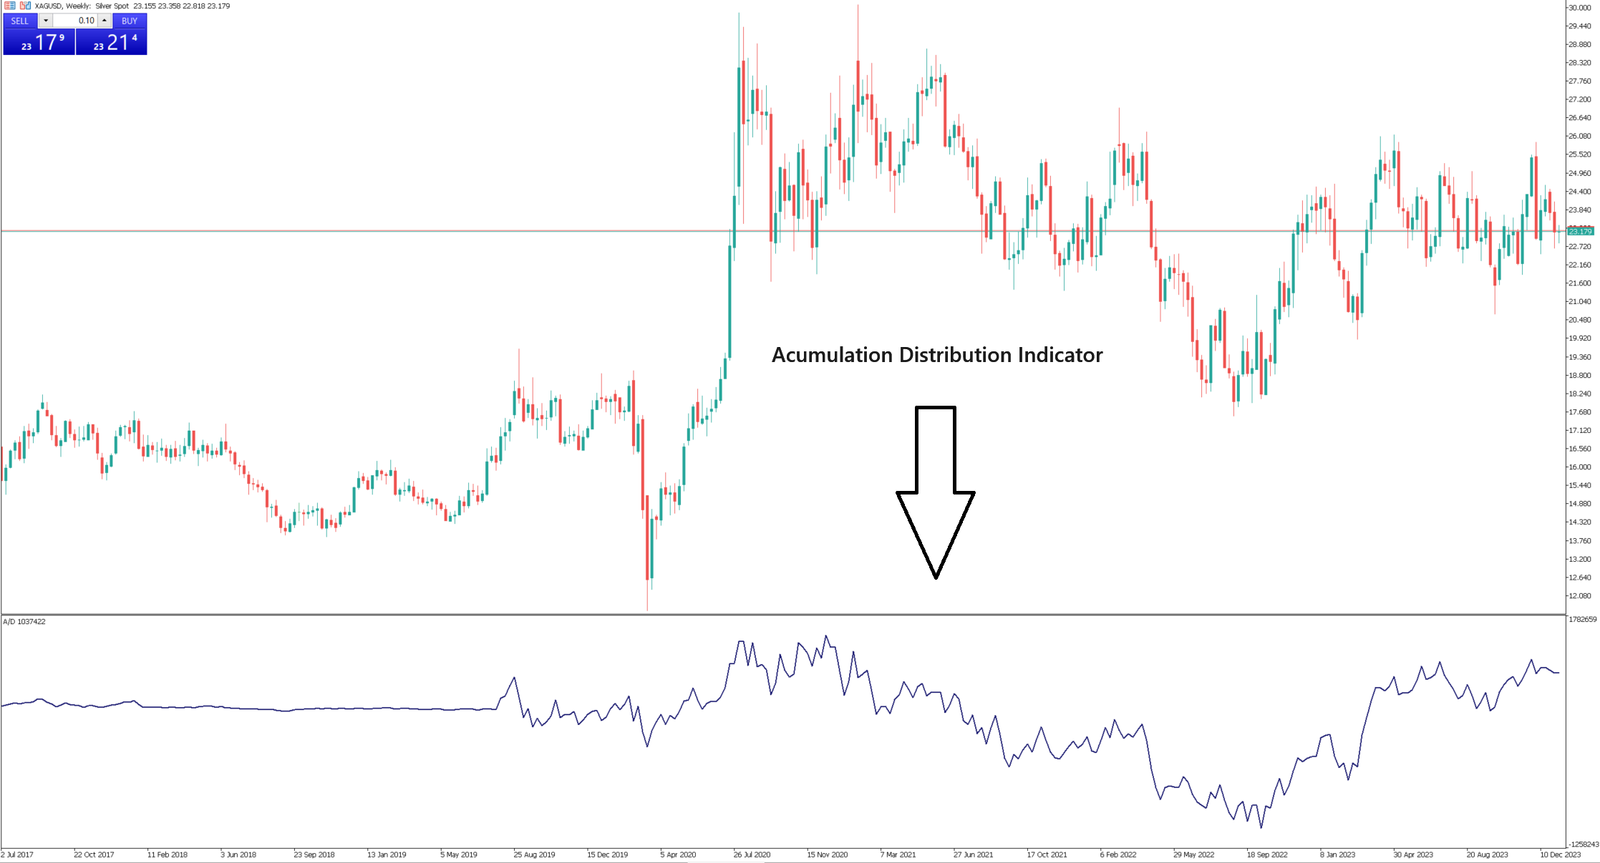 Acumulation Distribution Indicator Confirm the trend, confirm a downward trend., Disagreements occurred, The price reache, indicator confirming, weakening and will likely.